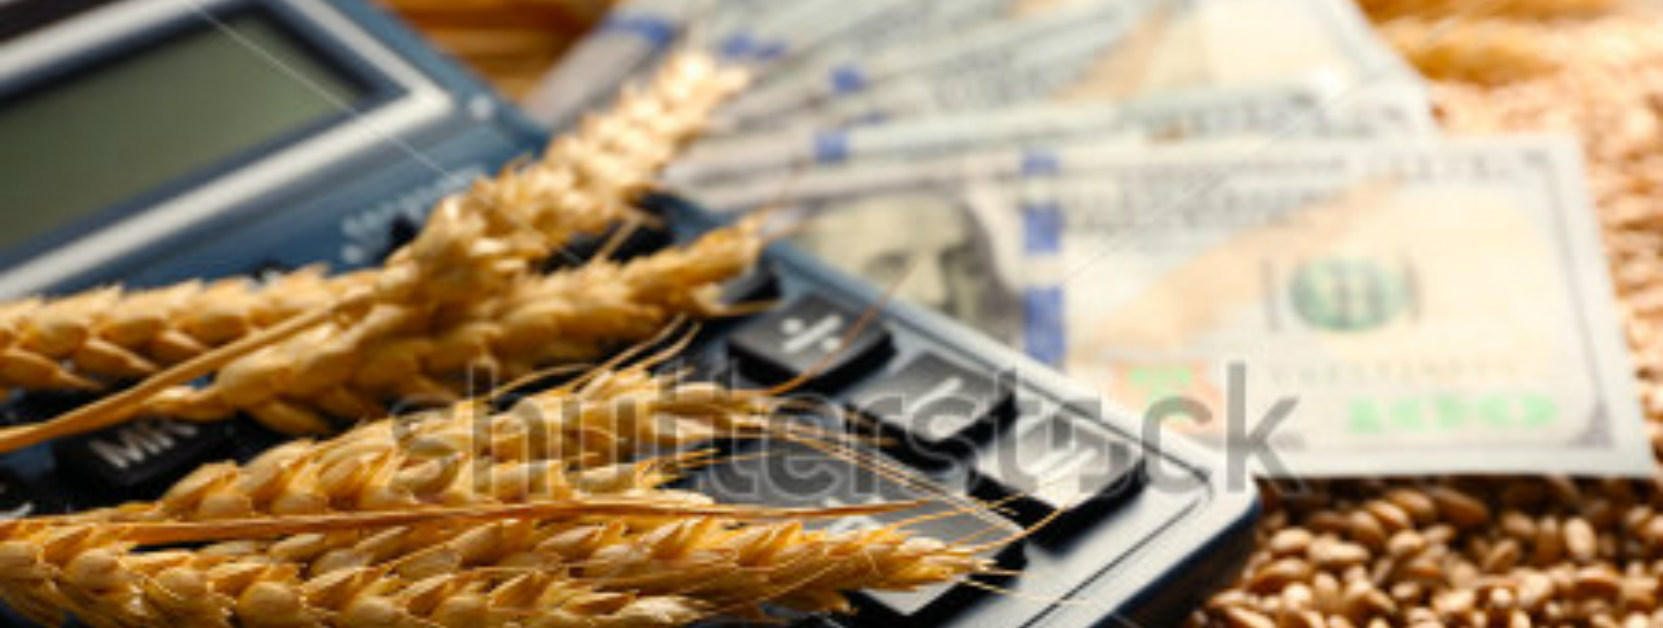 stock-photo-dollar-banknotes-calculator-and-wheat-grains-on-wooden-background-agricultural-income-concept-386210458 re-sized